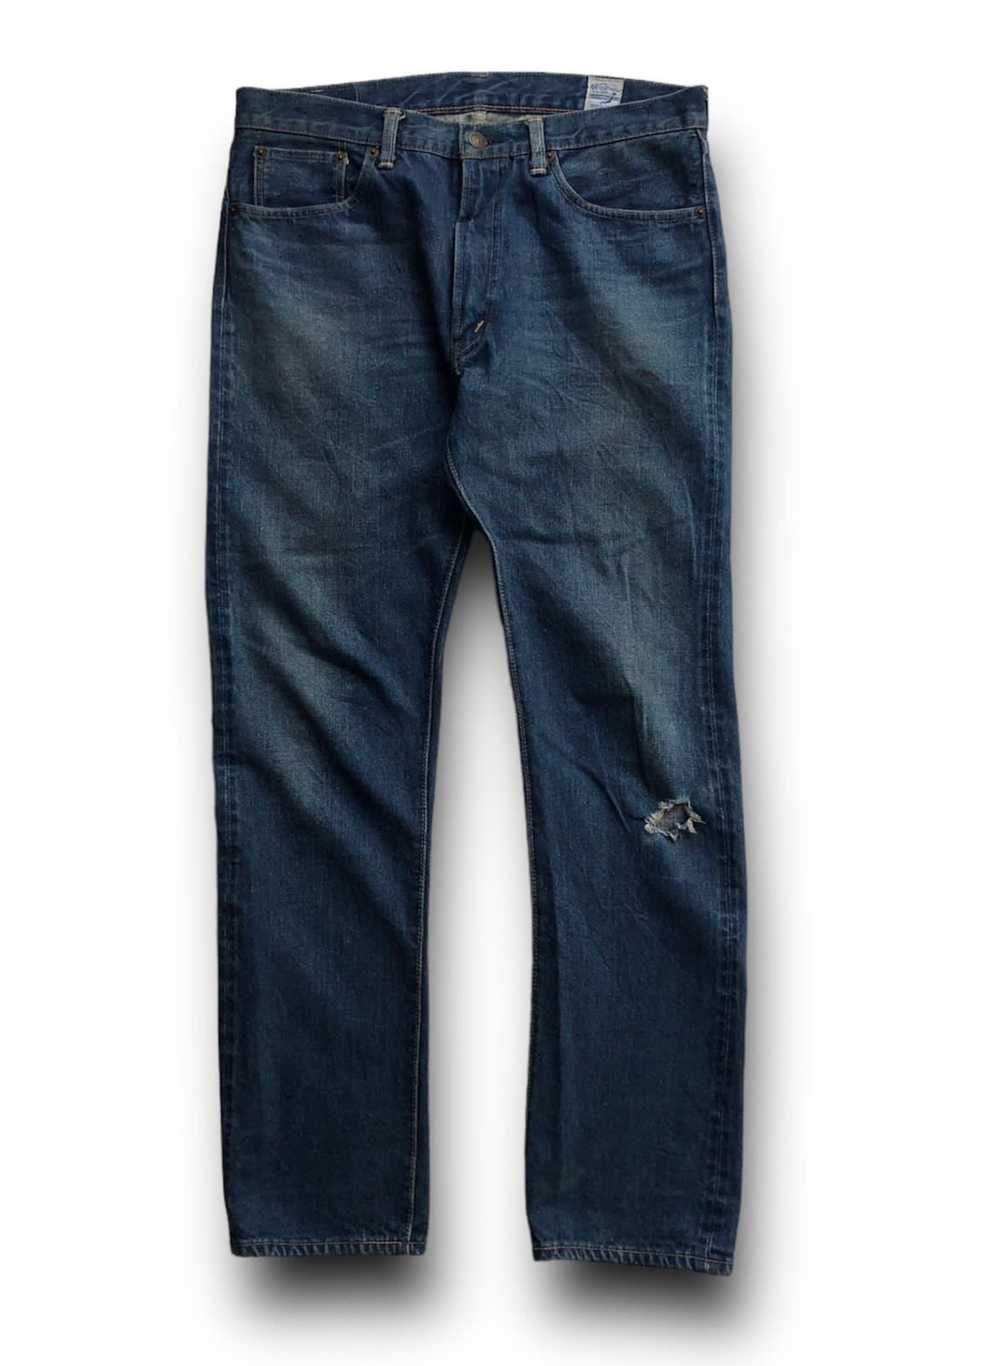 Japanese Brand × Orslow Orslow jeans selvedge - image 3